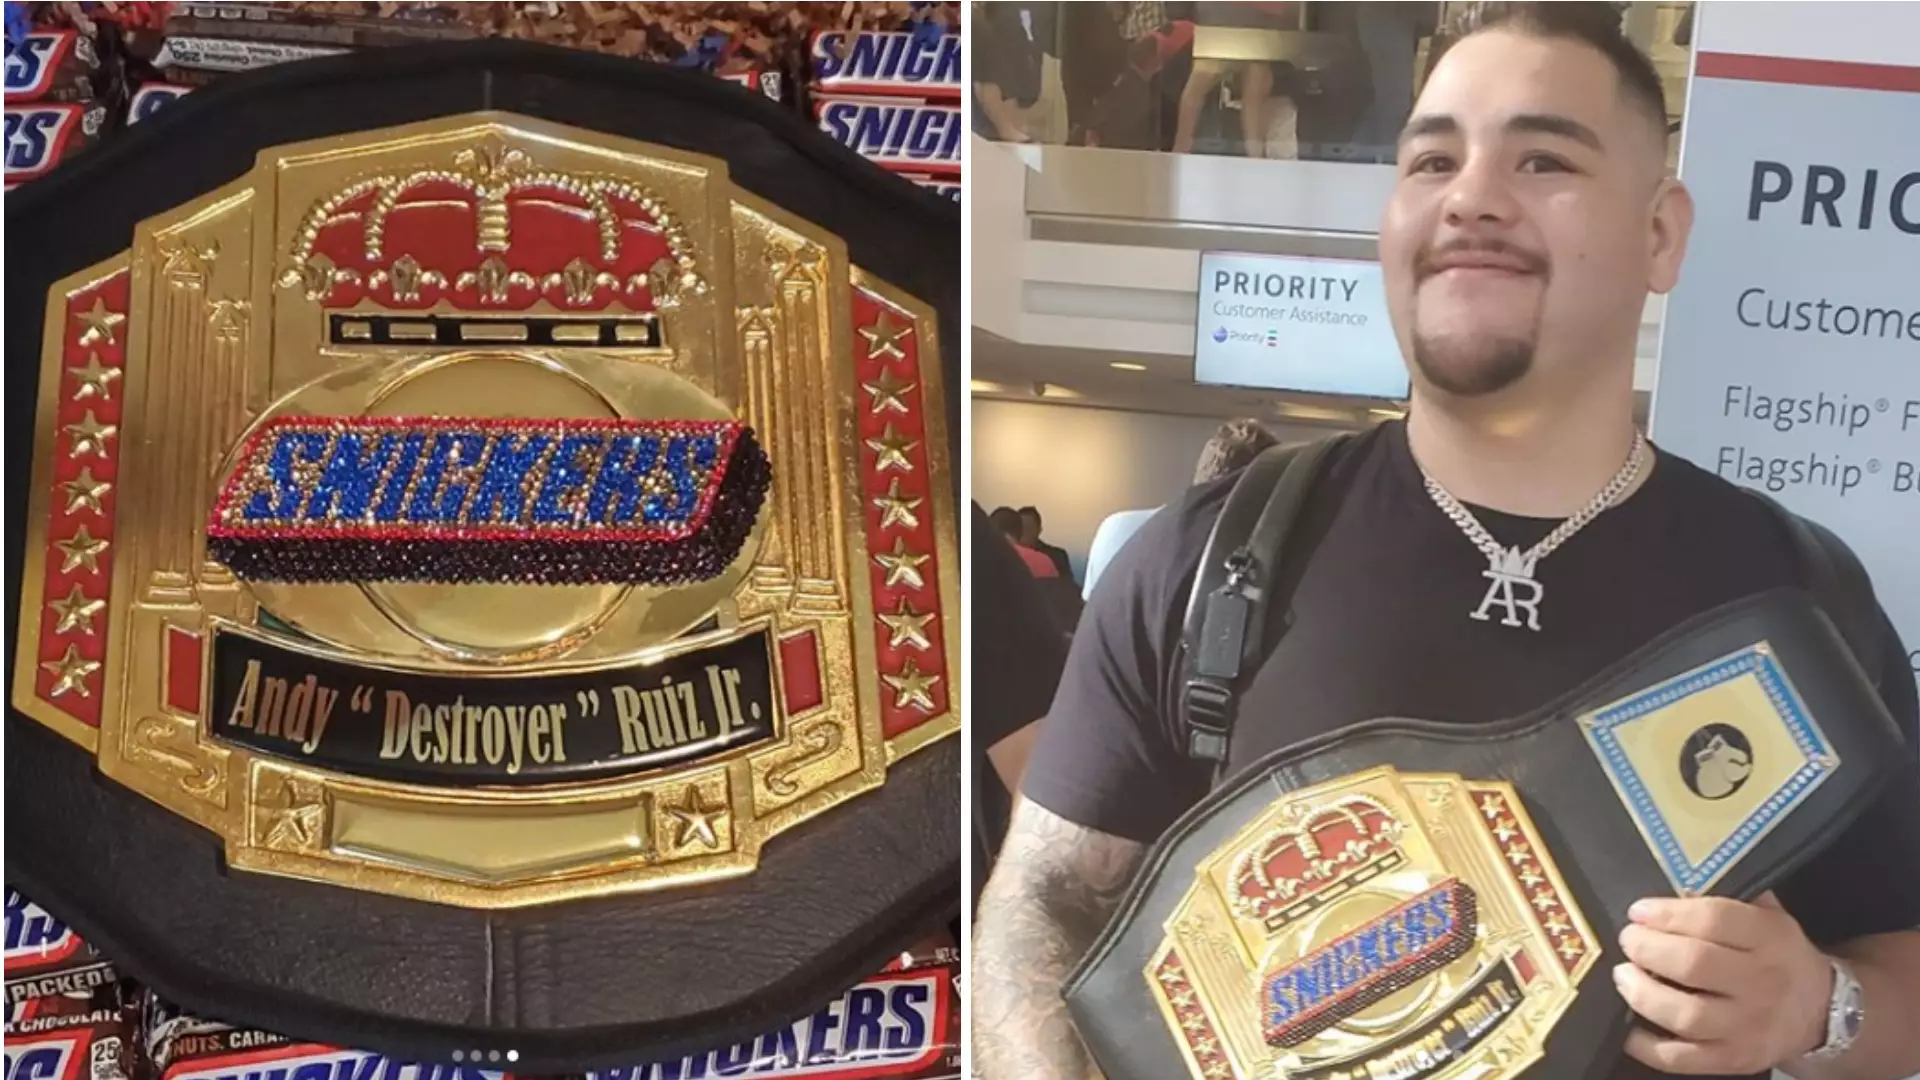 Andy Ruiz Jr Hilariously Pictured With Snickers Belt He Received For Beating Anthony Joshua